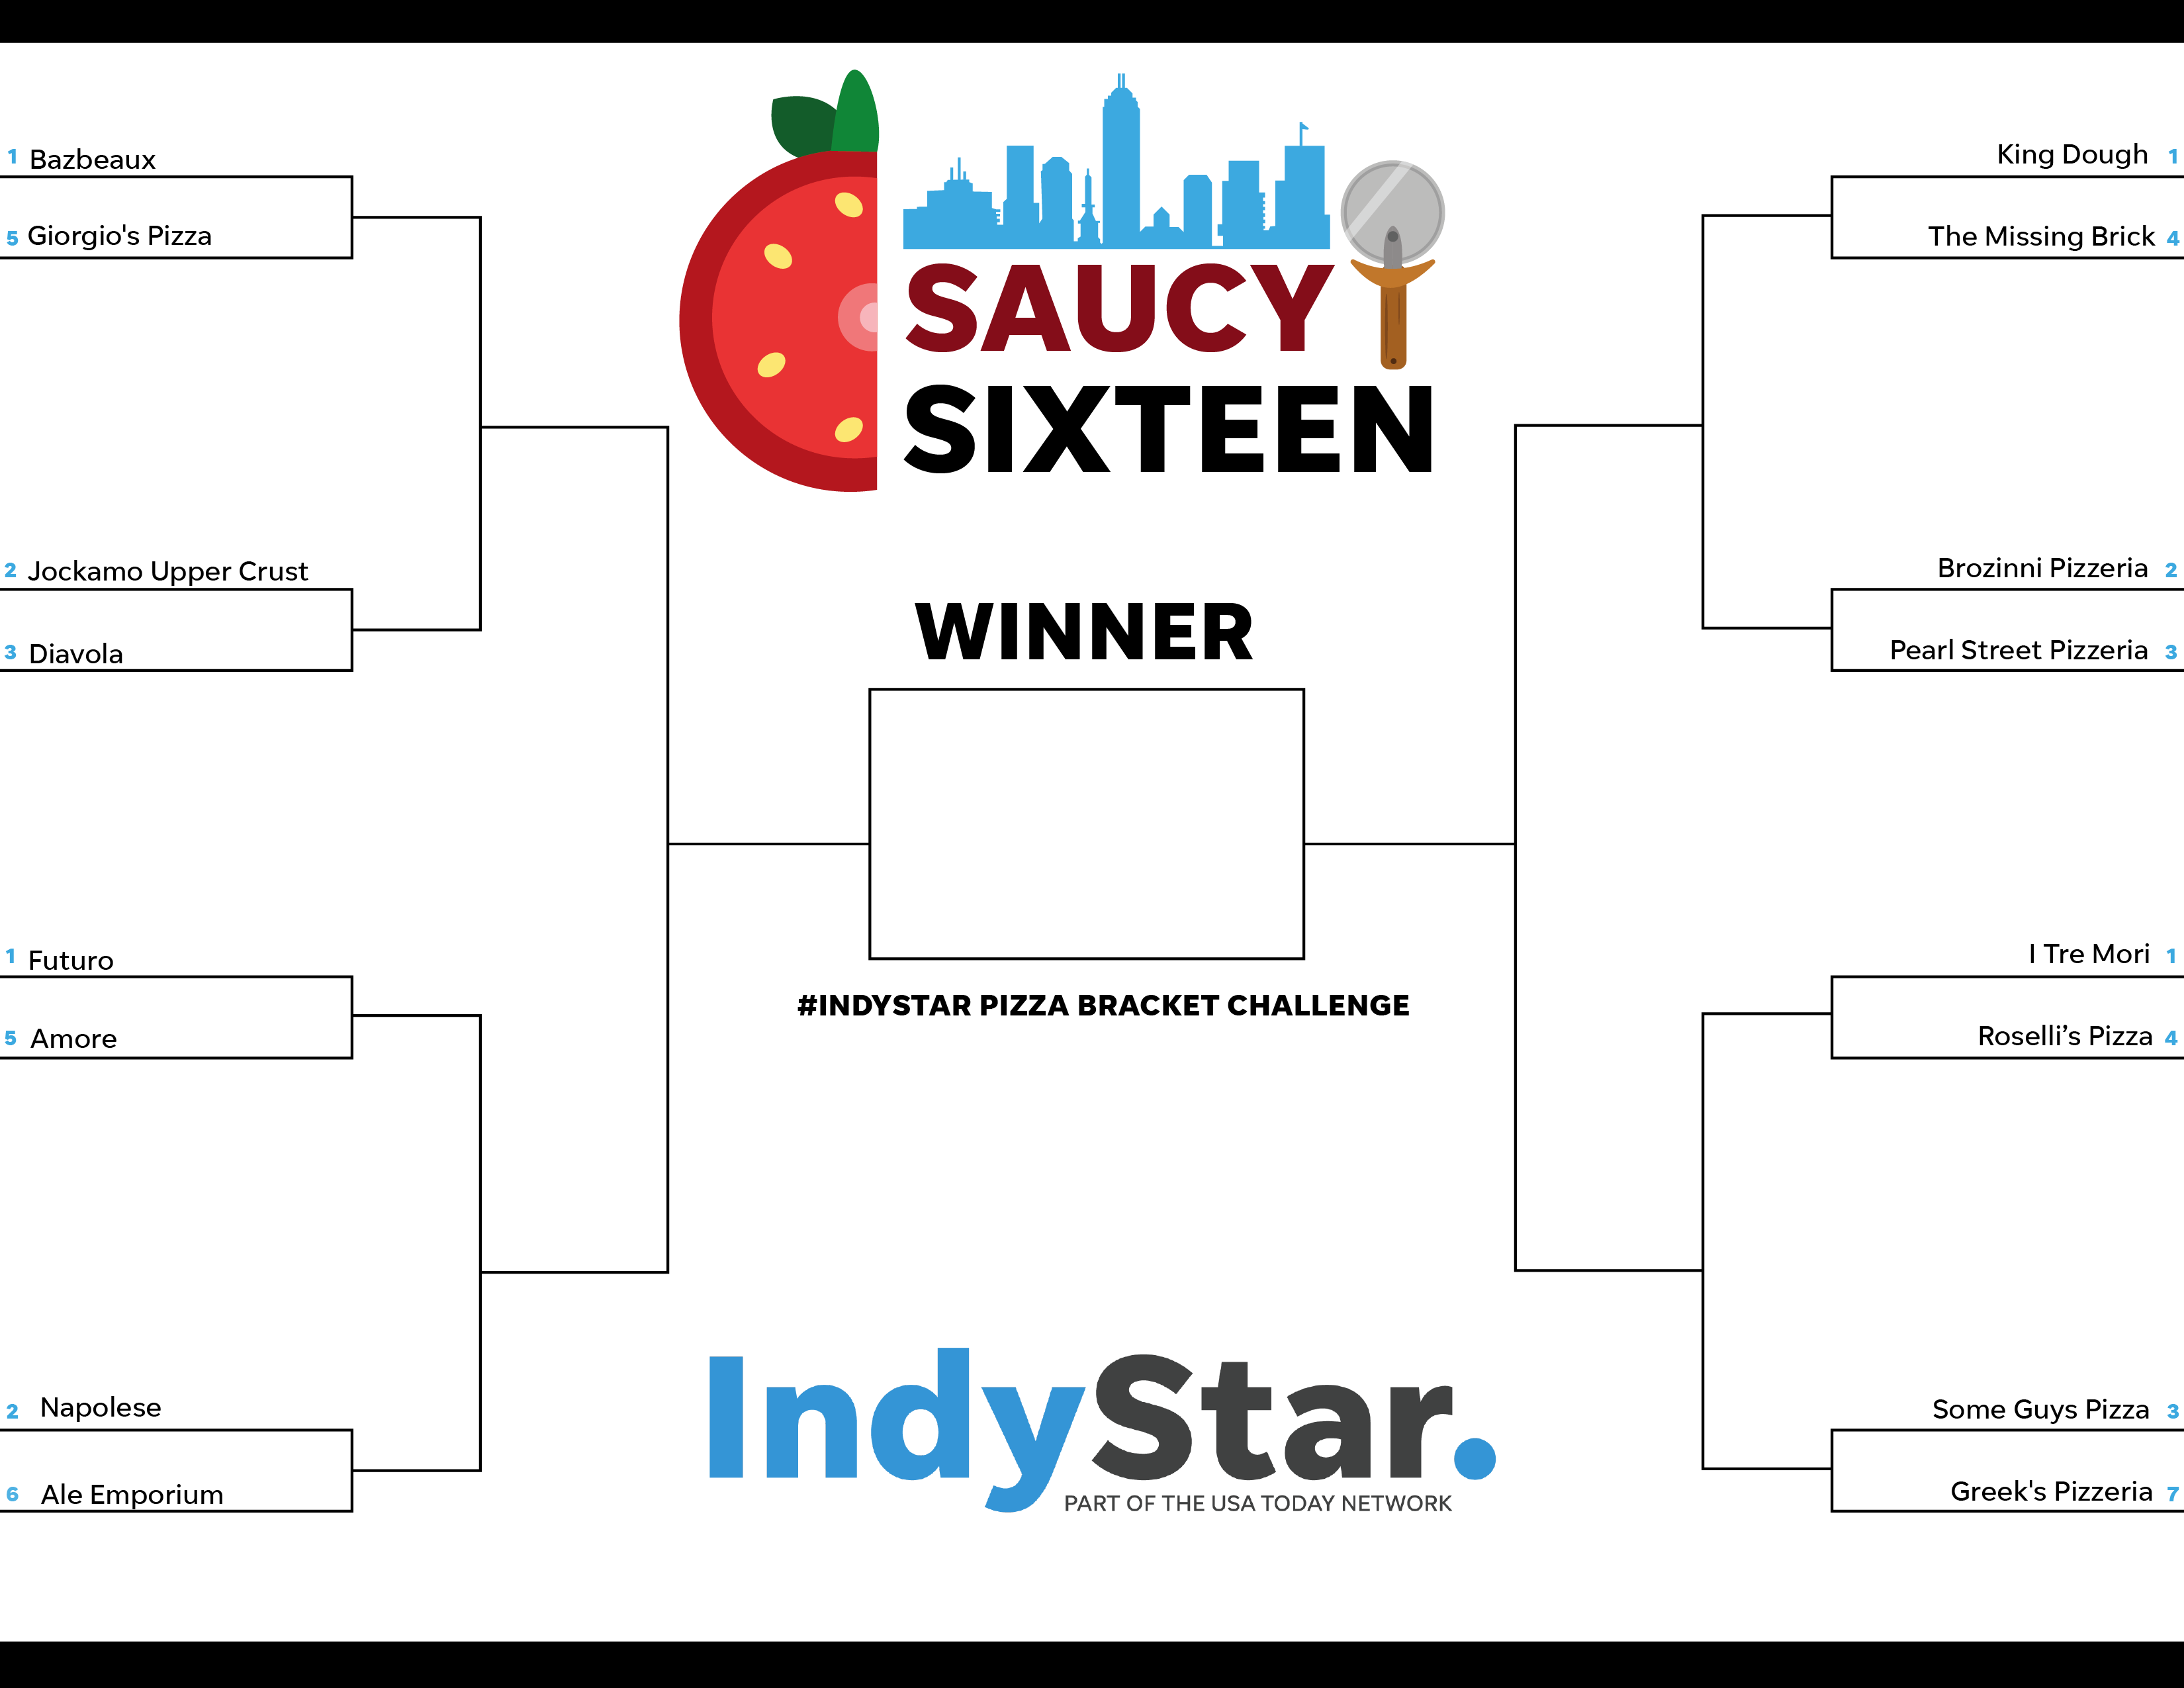 After more than 70,000 votes, these 16 spots advanced to Round 2 of the IndyStar Pizza Bracket Challenge.